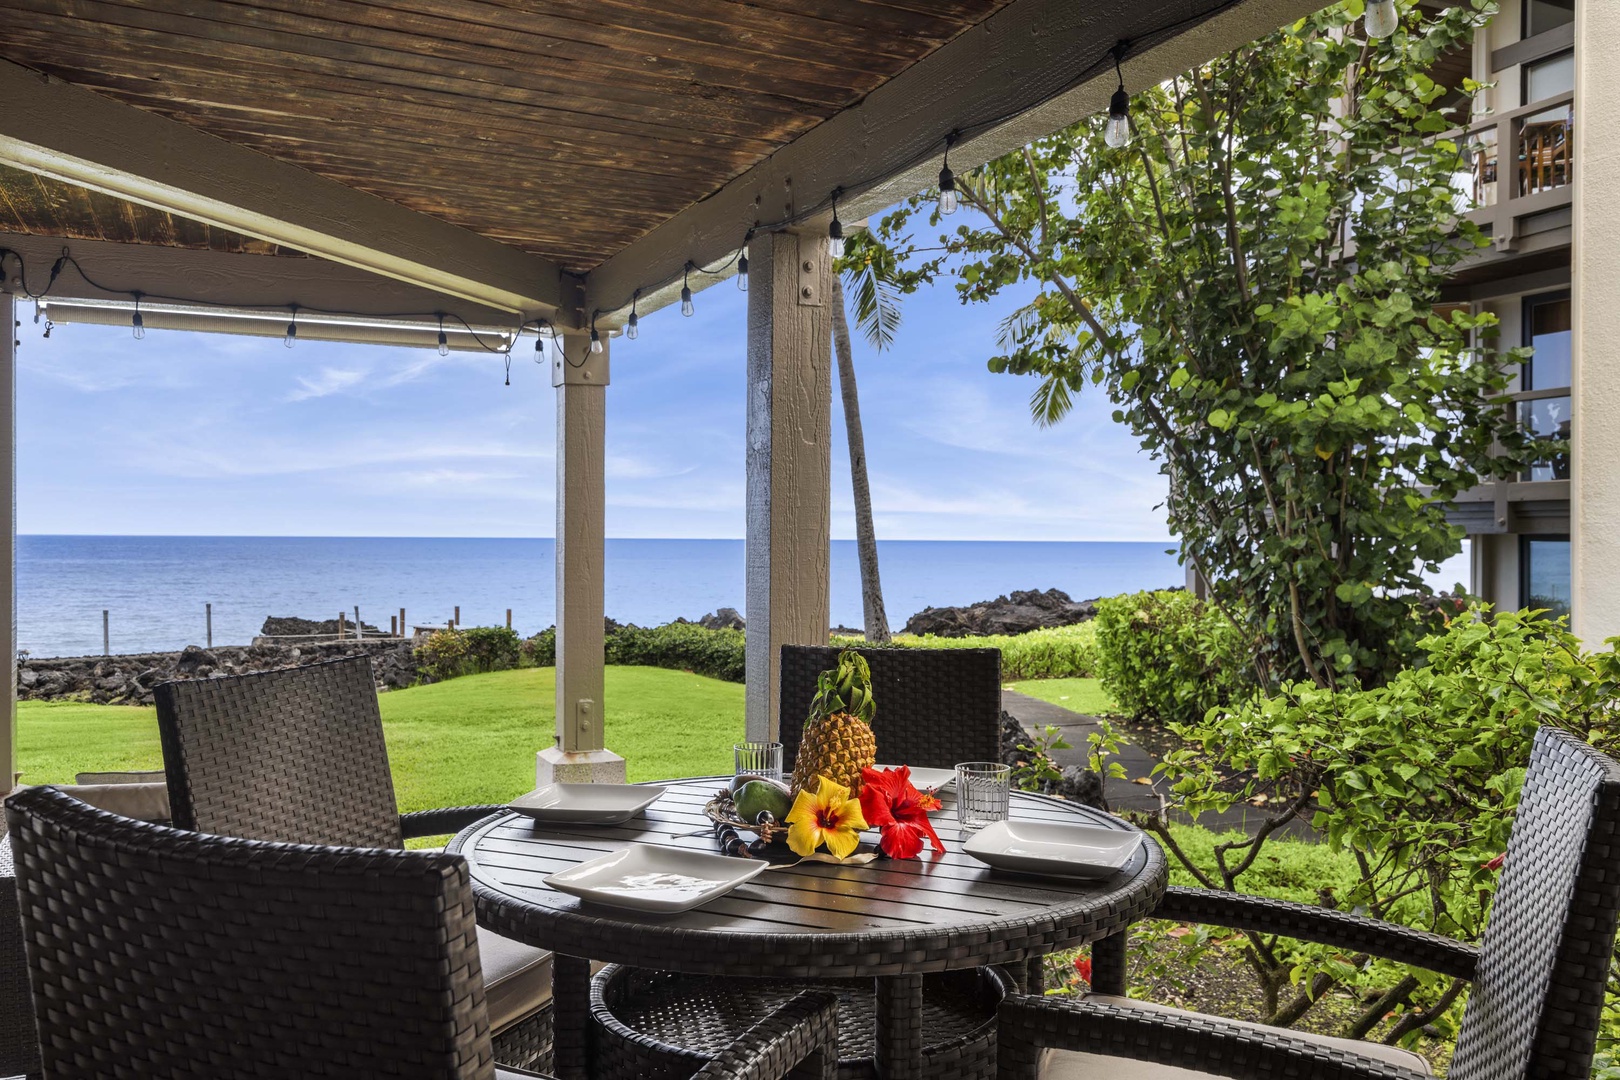 Kailua Kona Vacation Rentals, Keauhou Kona Surf & Racquet 2101 - Lanai dinette with four seats in front of ocean views and lush greens.